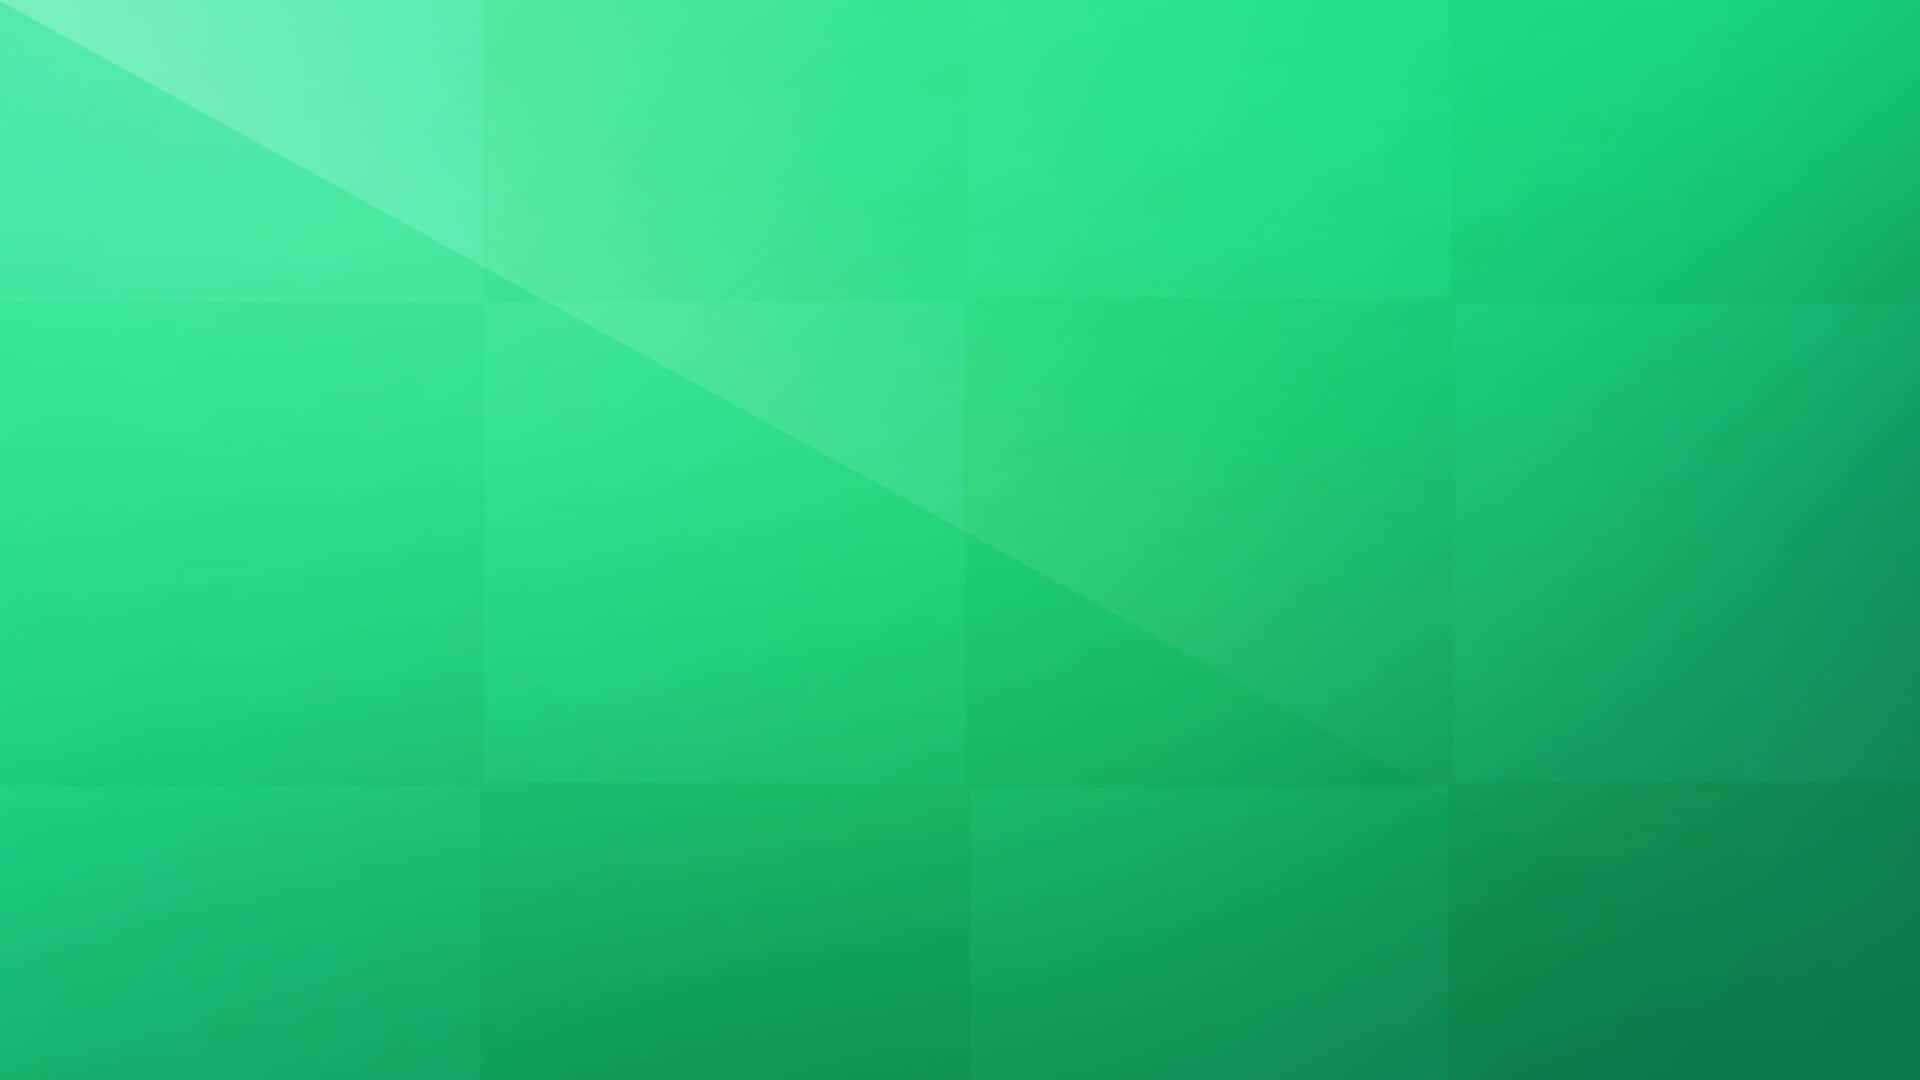 Green Squares On A Green Background